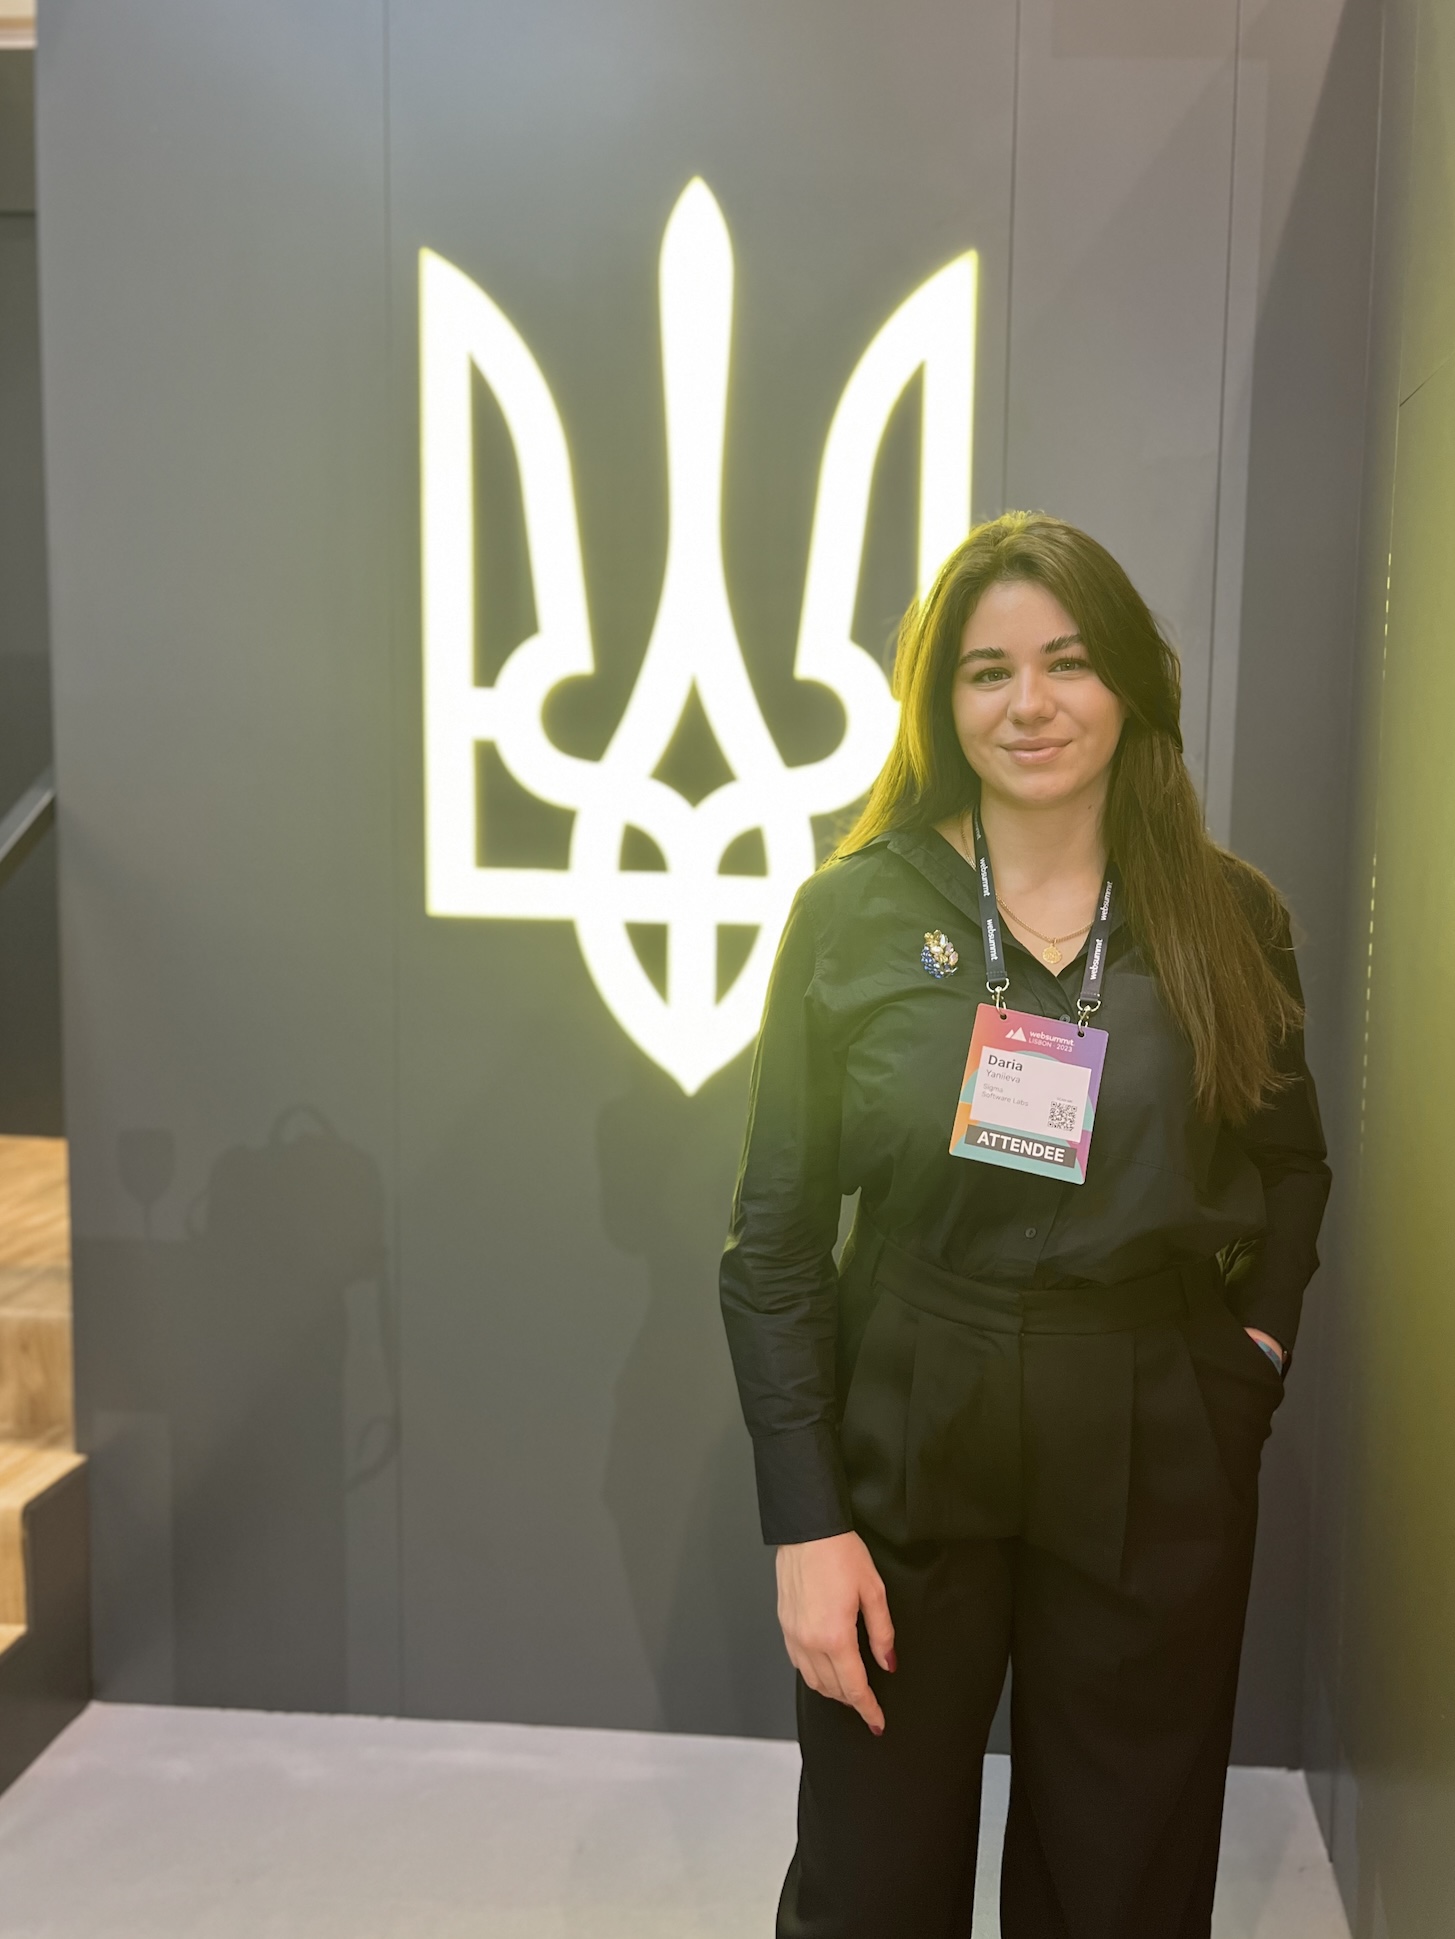 Photo by Daria Yaniieva, investment director at Sigma Software Labs, which supports Ukrainian drone startups